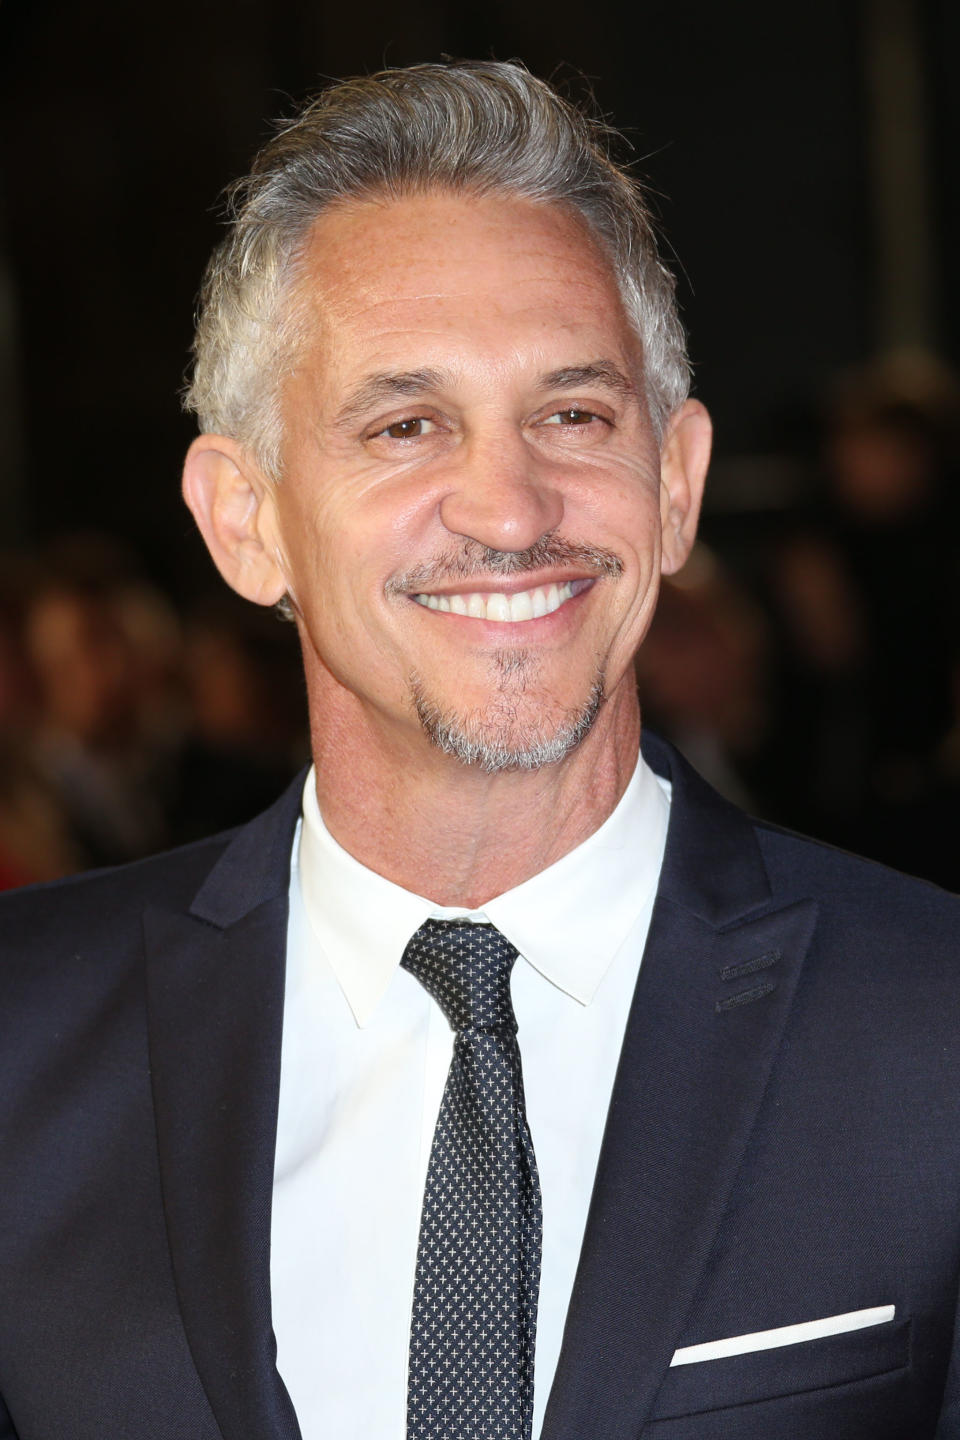 Gary Lineker poses for photographers on arrival for the World Premiere of the latest Bond film, Spectre, at the Royal Albert Halll in central London, Monday, Oct. 26, 2015. (Photo by Joel Ryan/Invision/AP)